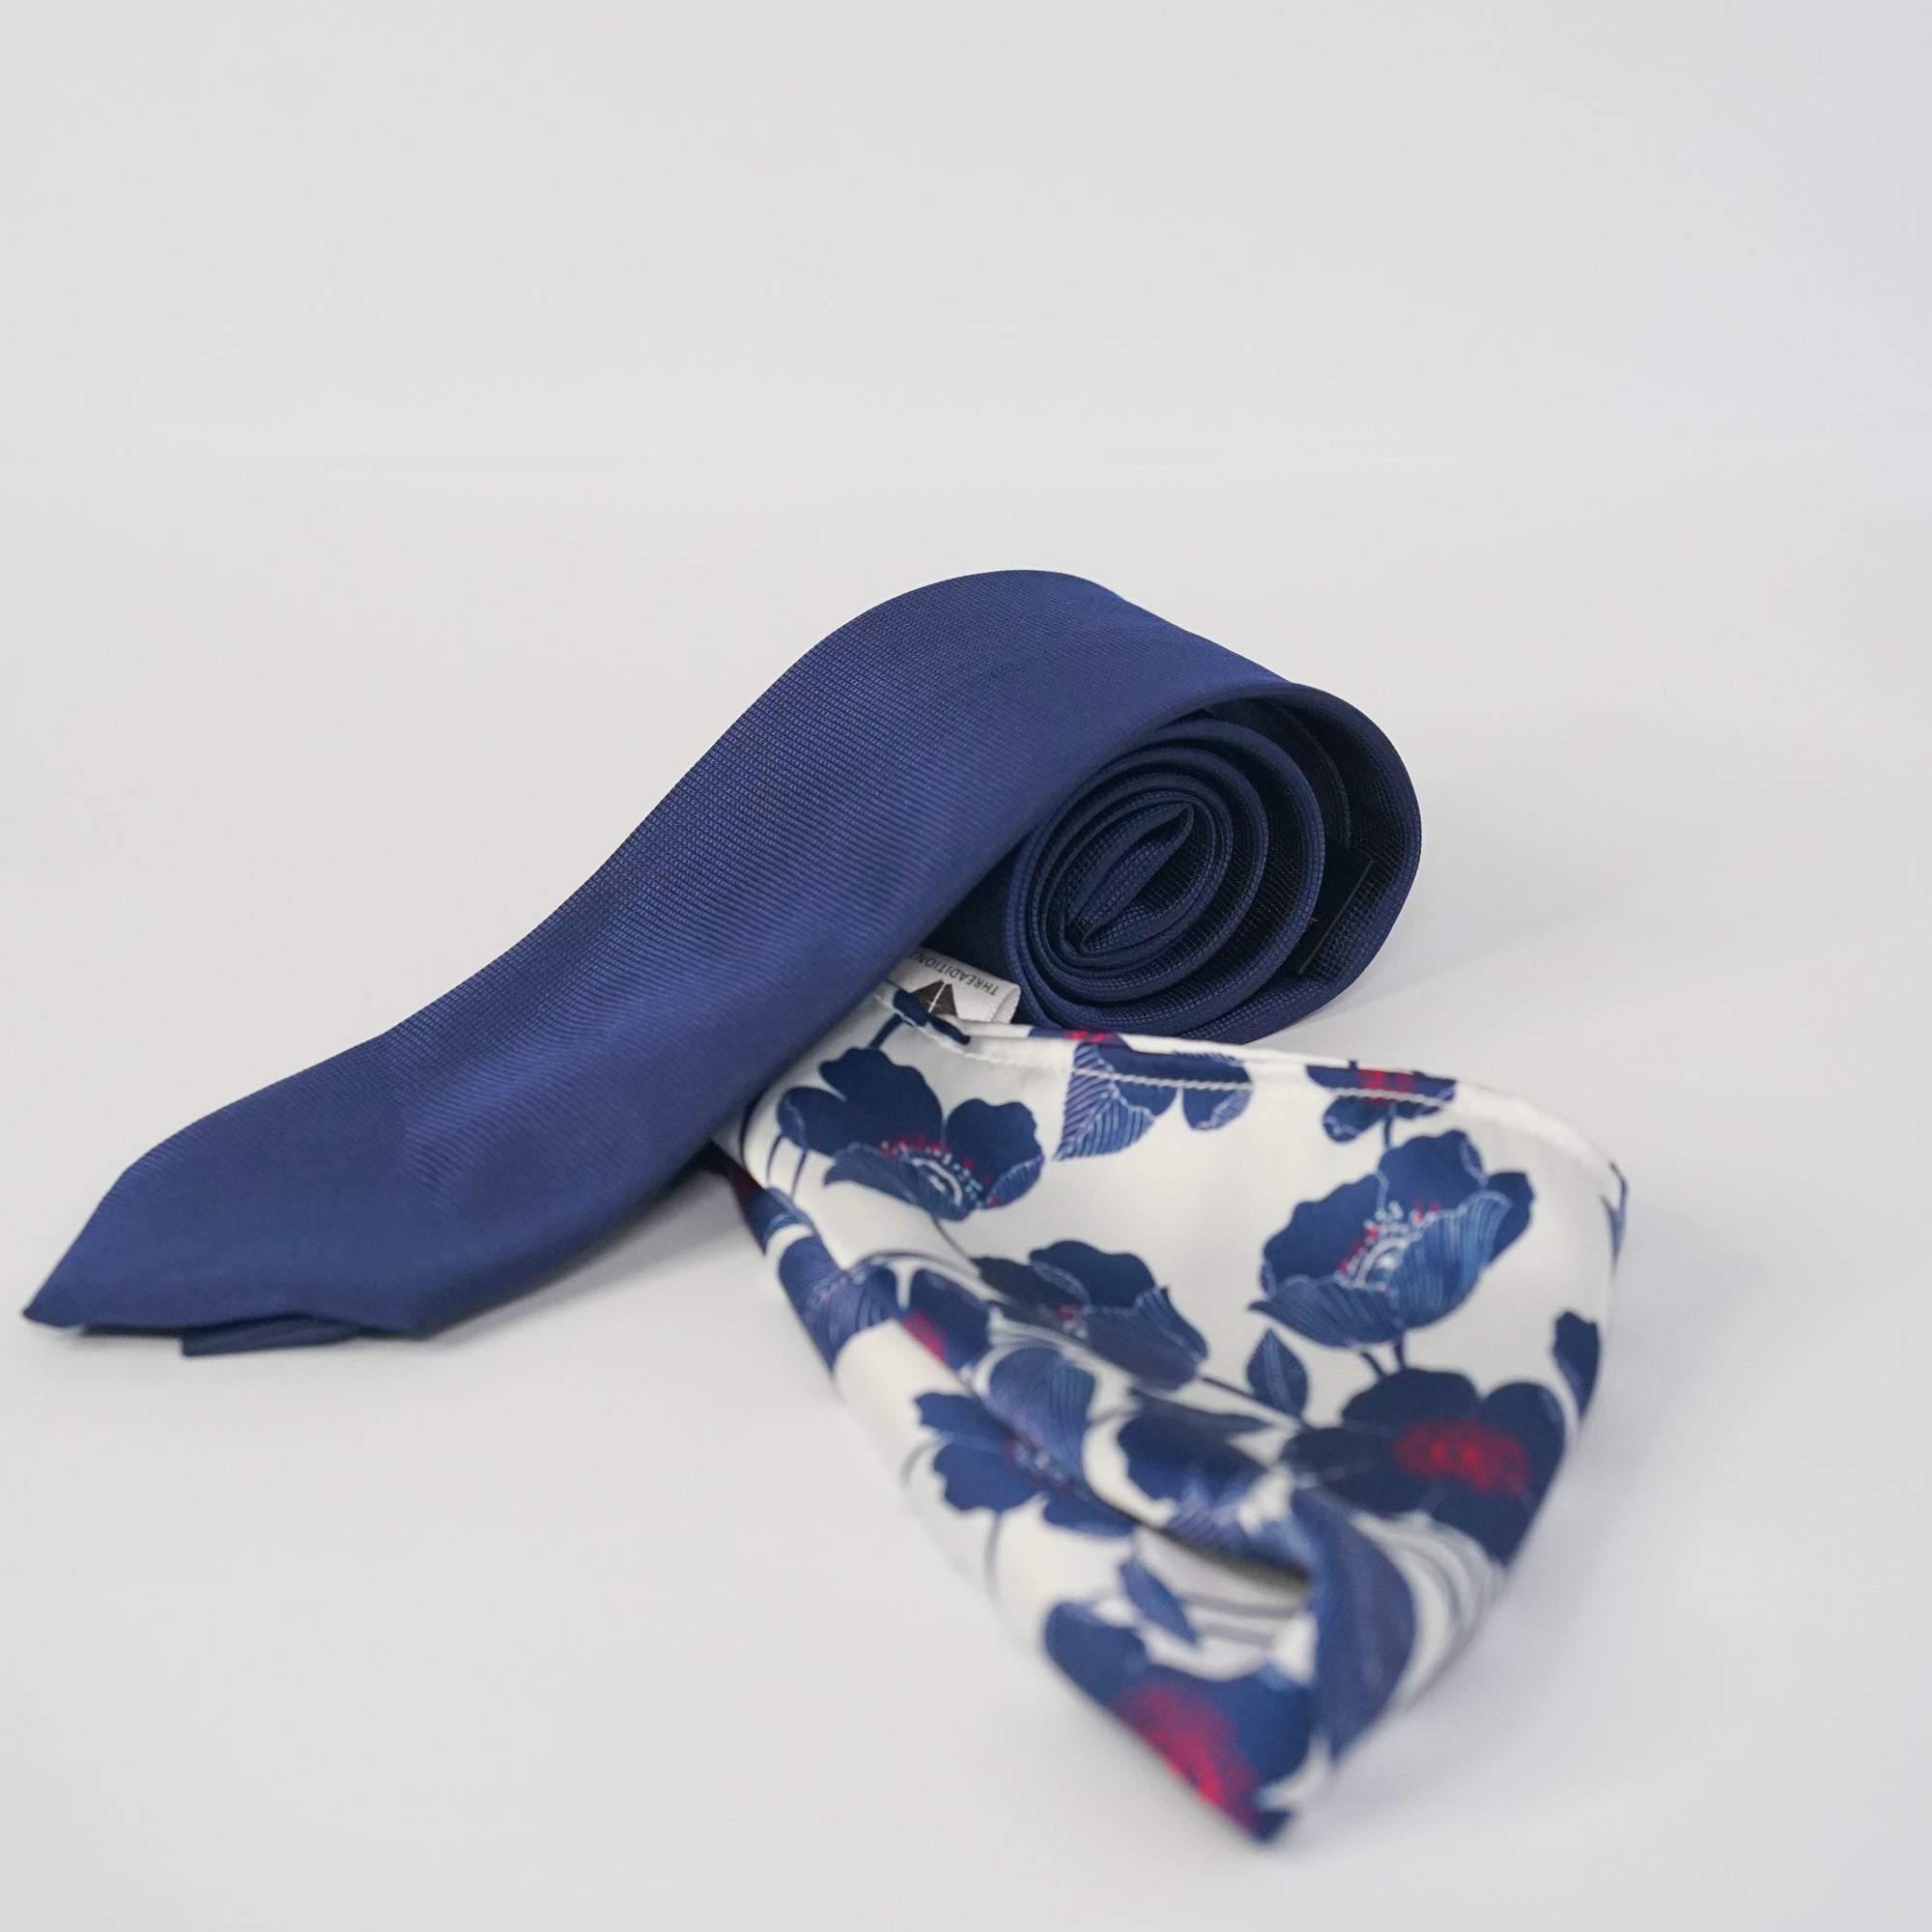 W21-BRF1 POCKET SQUARE AND TIE SET